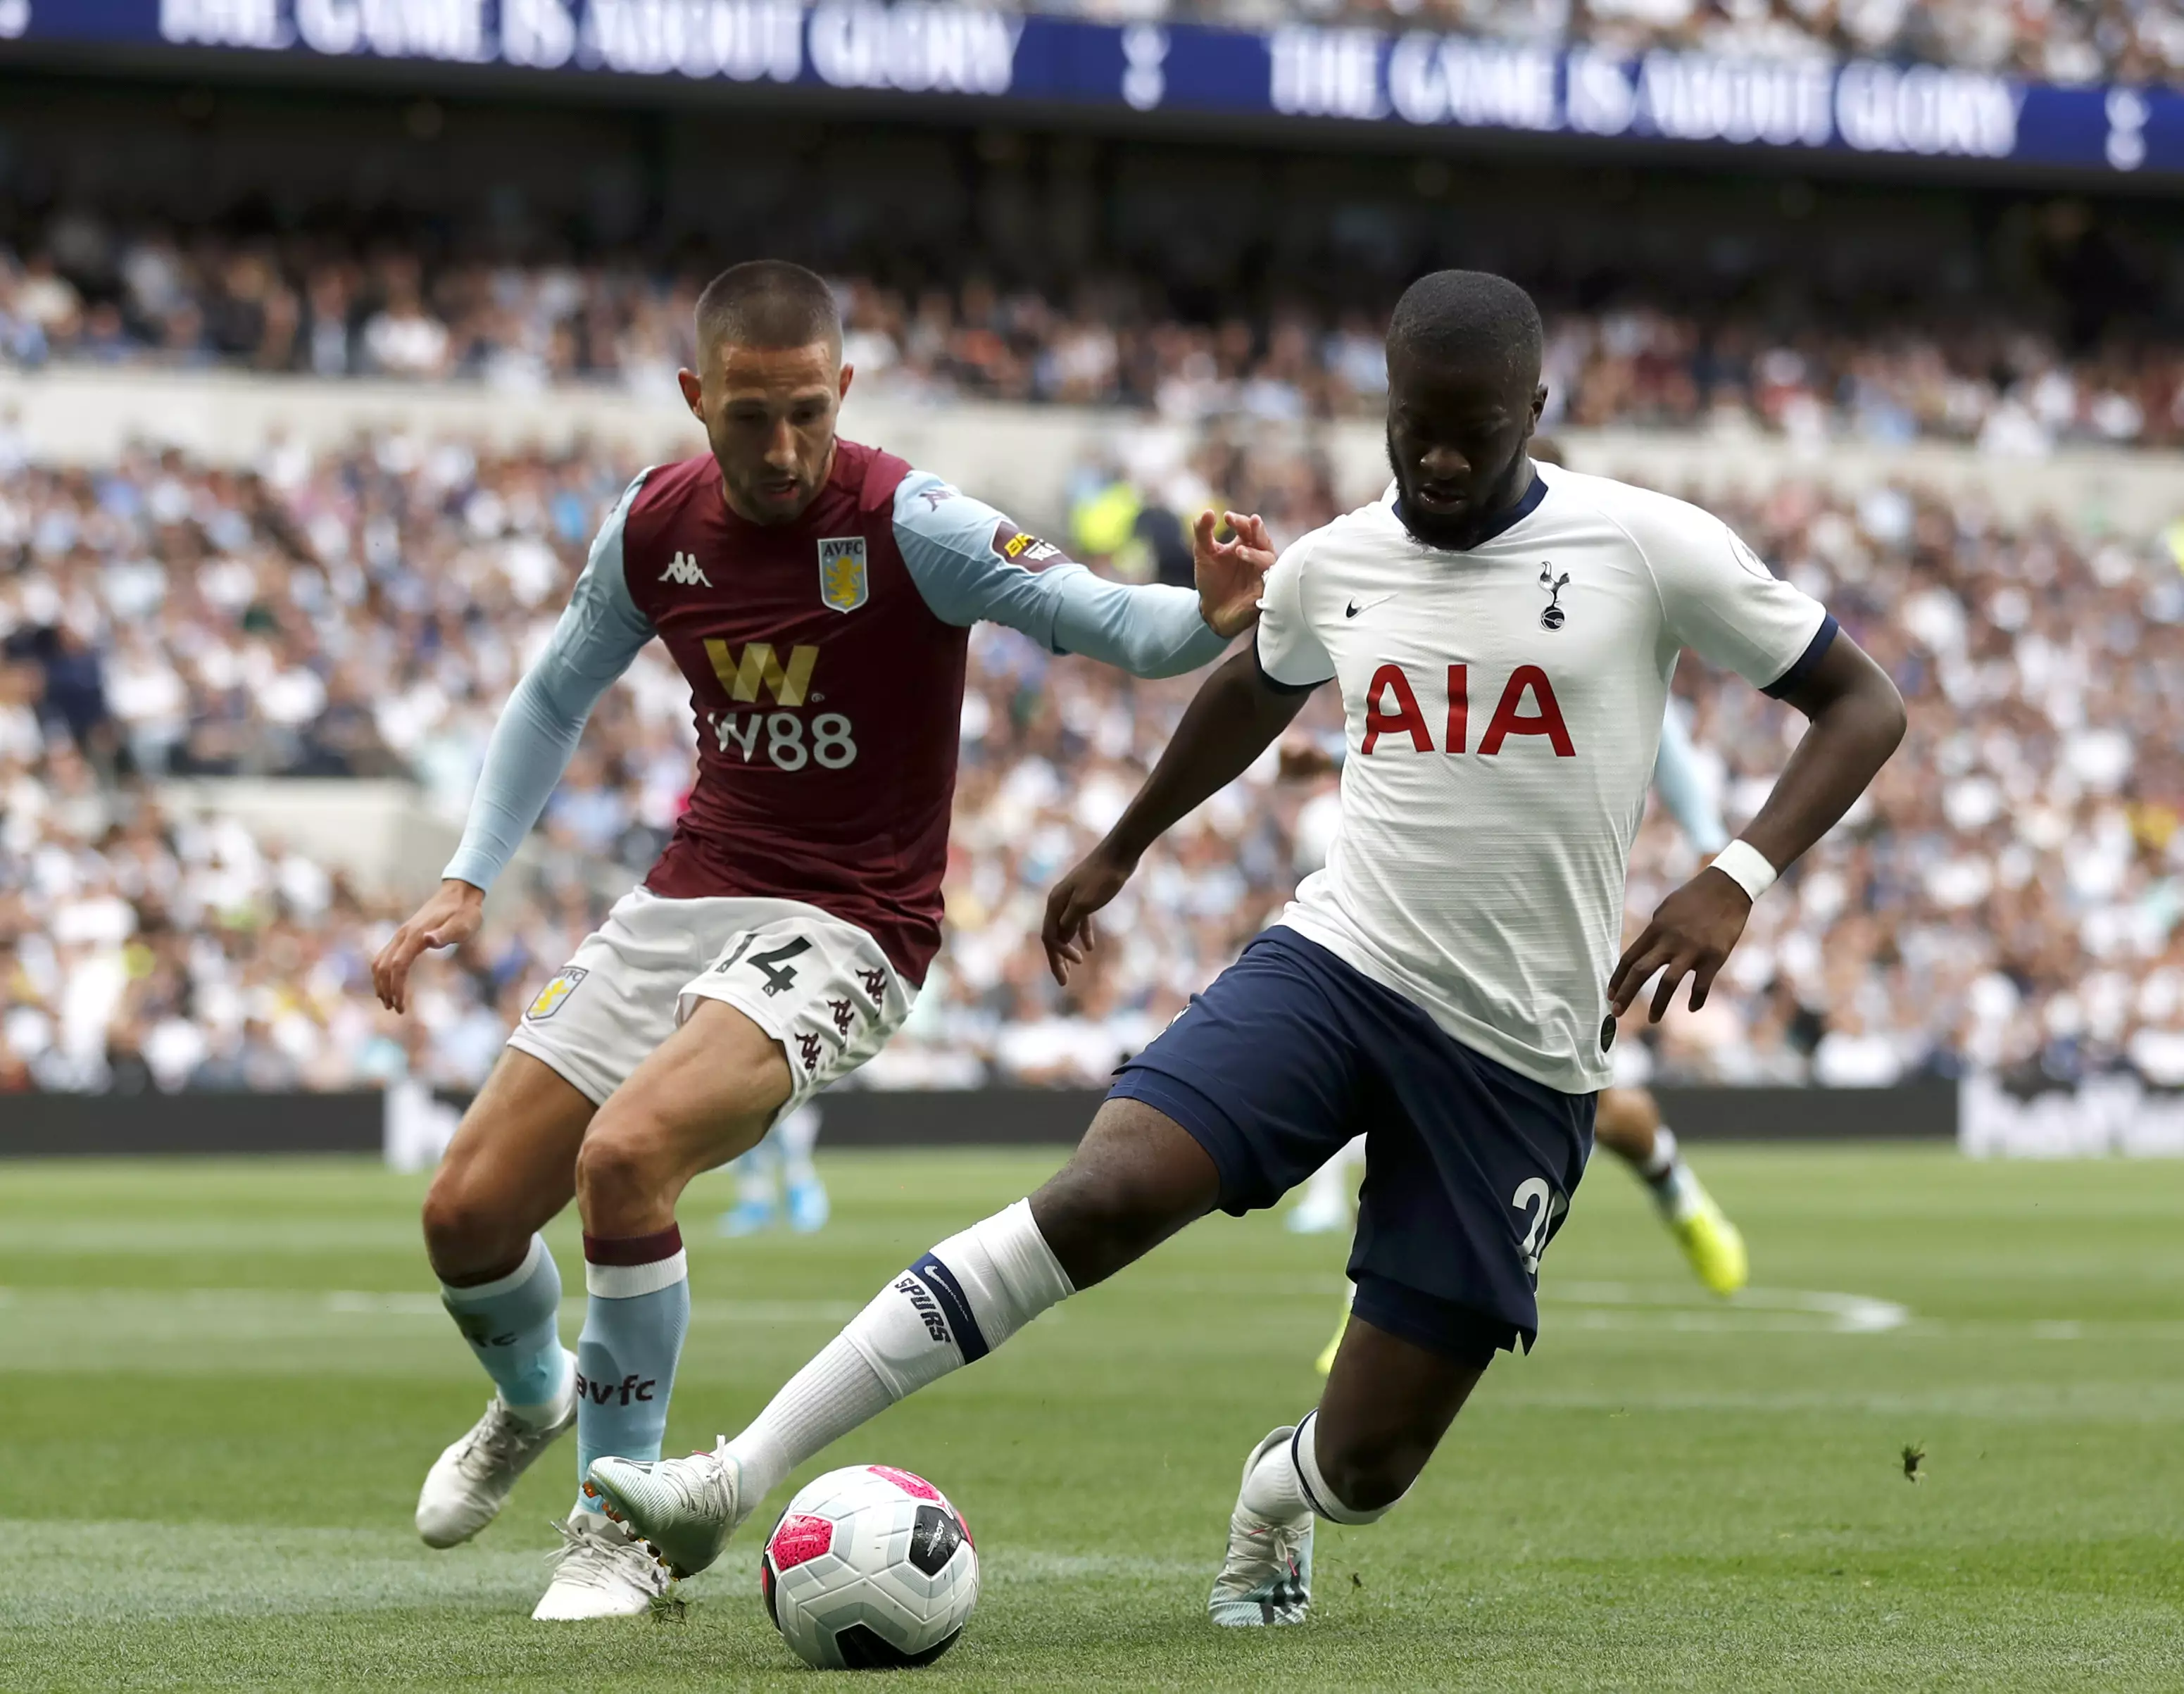 Tottenham signed Tanguy Ndombele from Lyon this summer